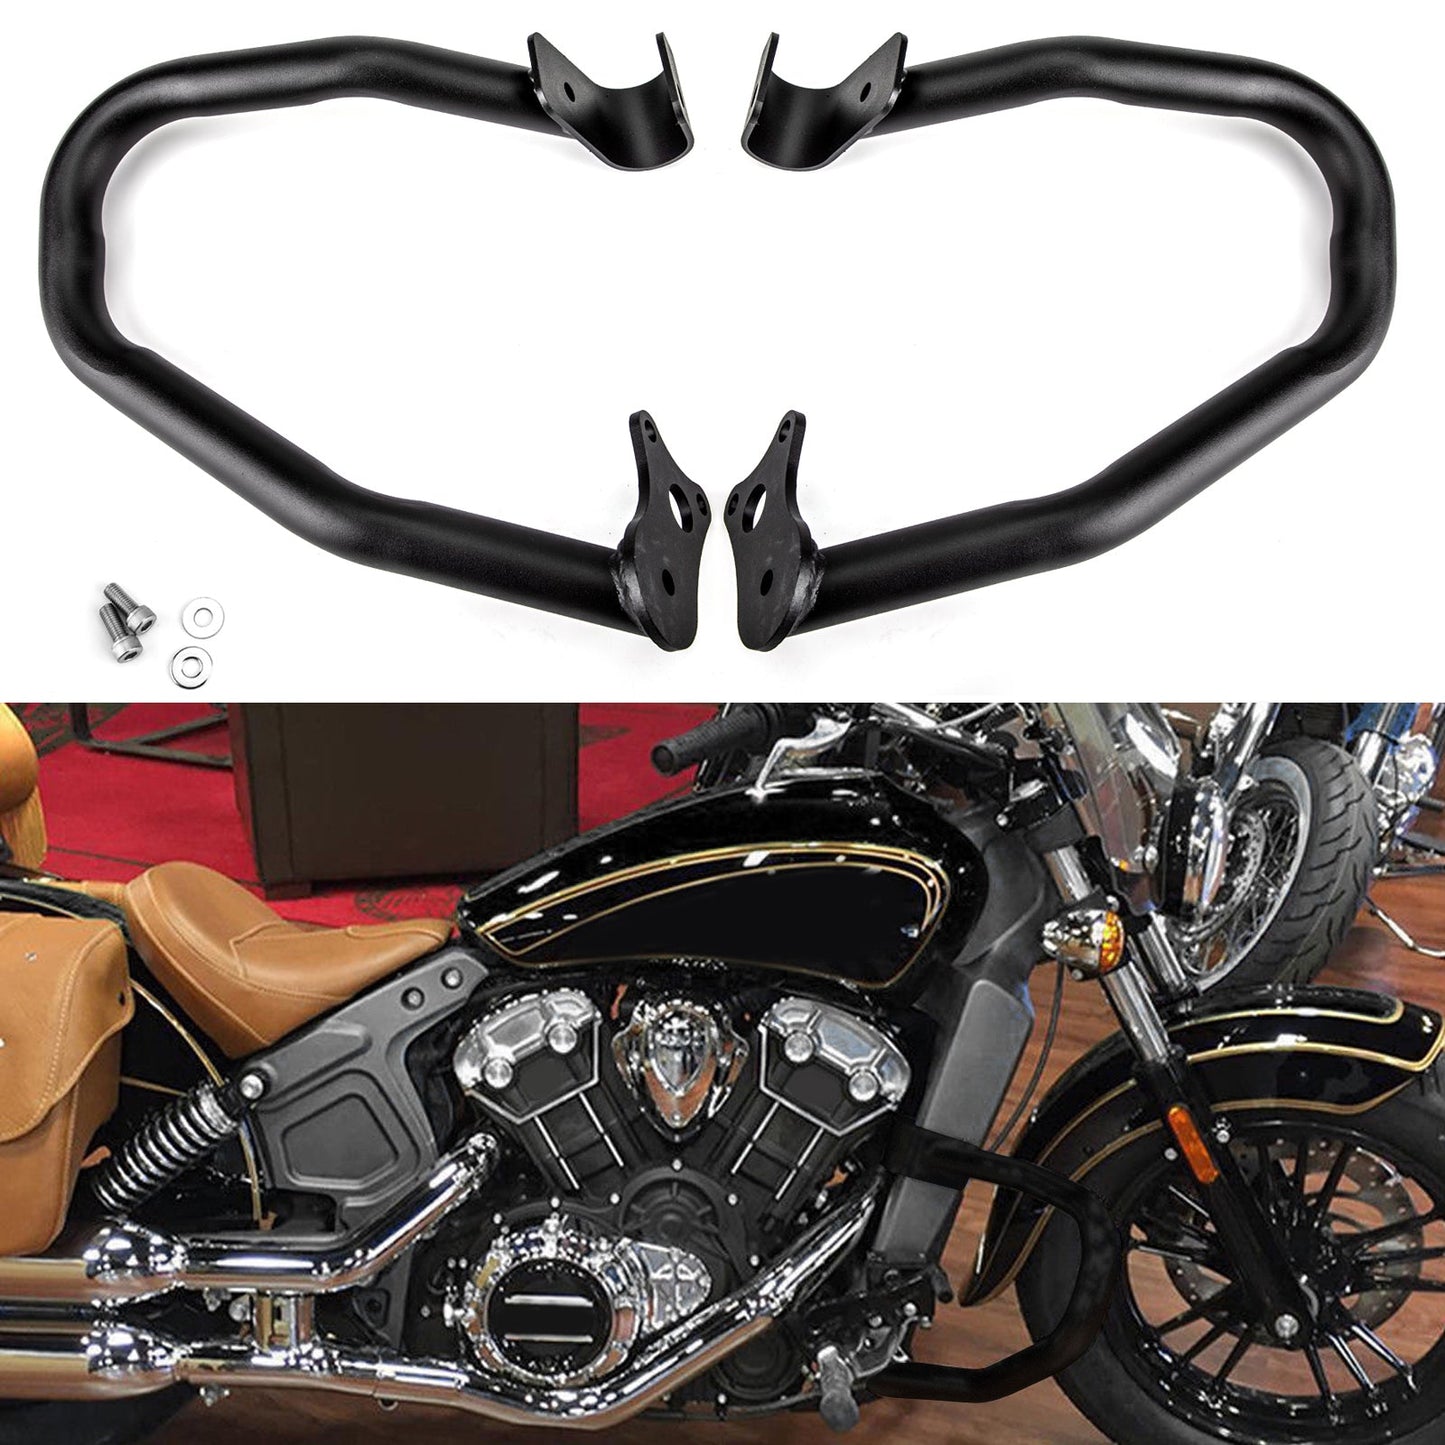 2018 Indian Scout Bobber New Reliable Engine Guard Highway Crash Bars